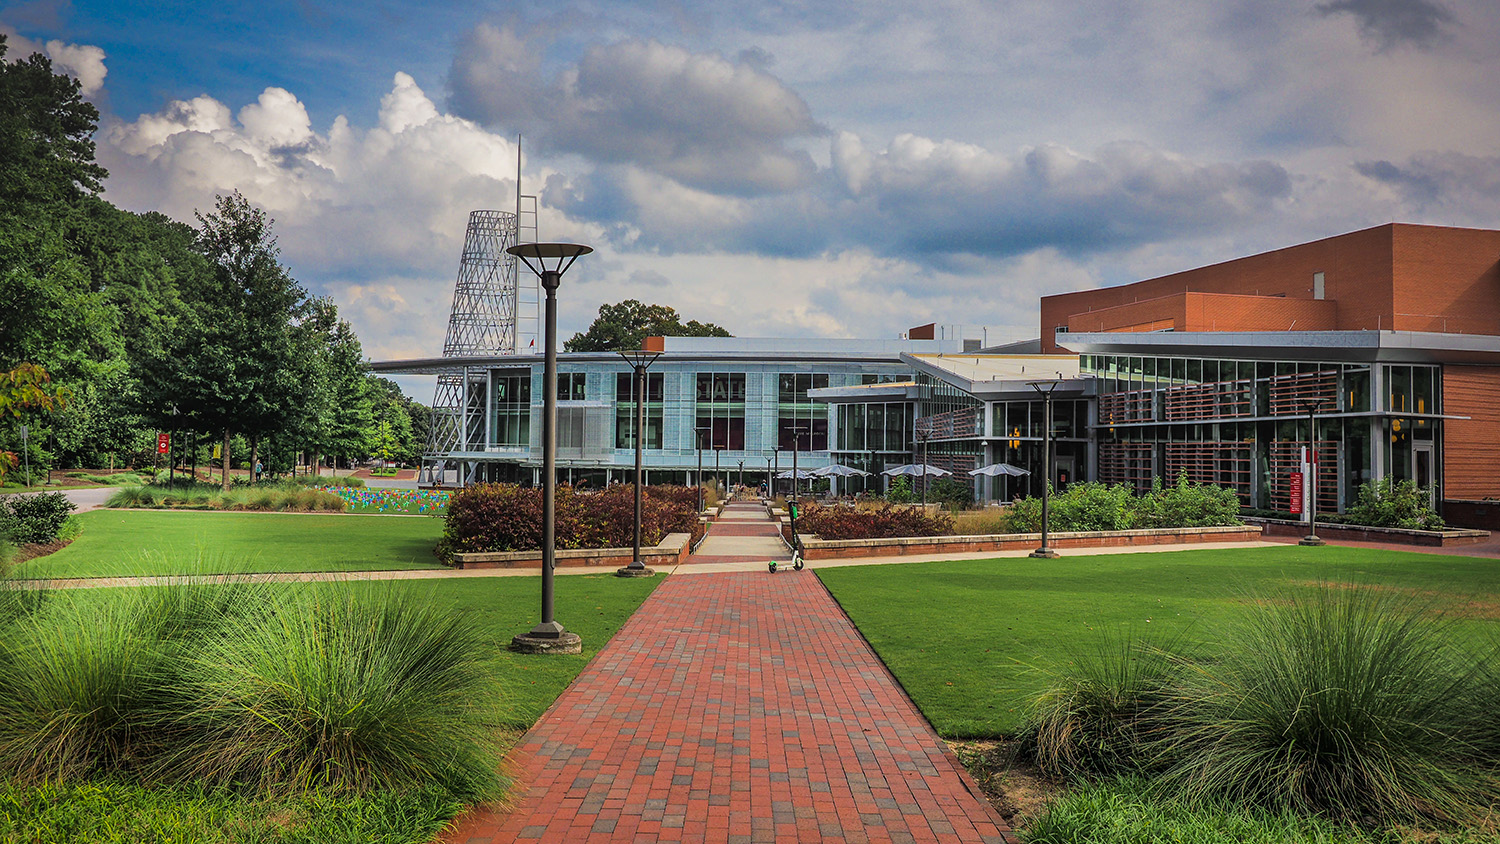 The Talley Student Union on a summer day. Photo by Marc Hall